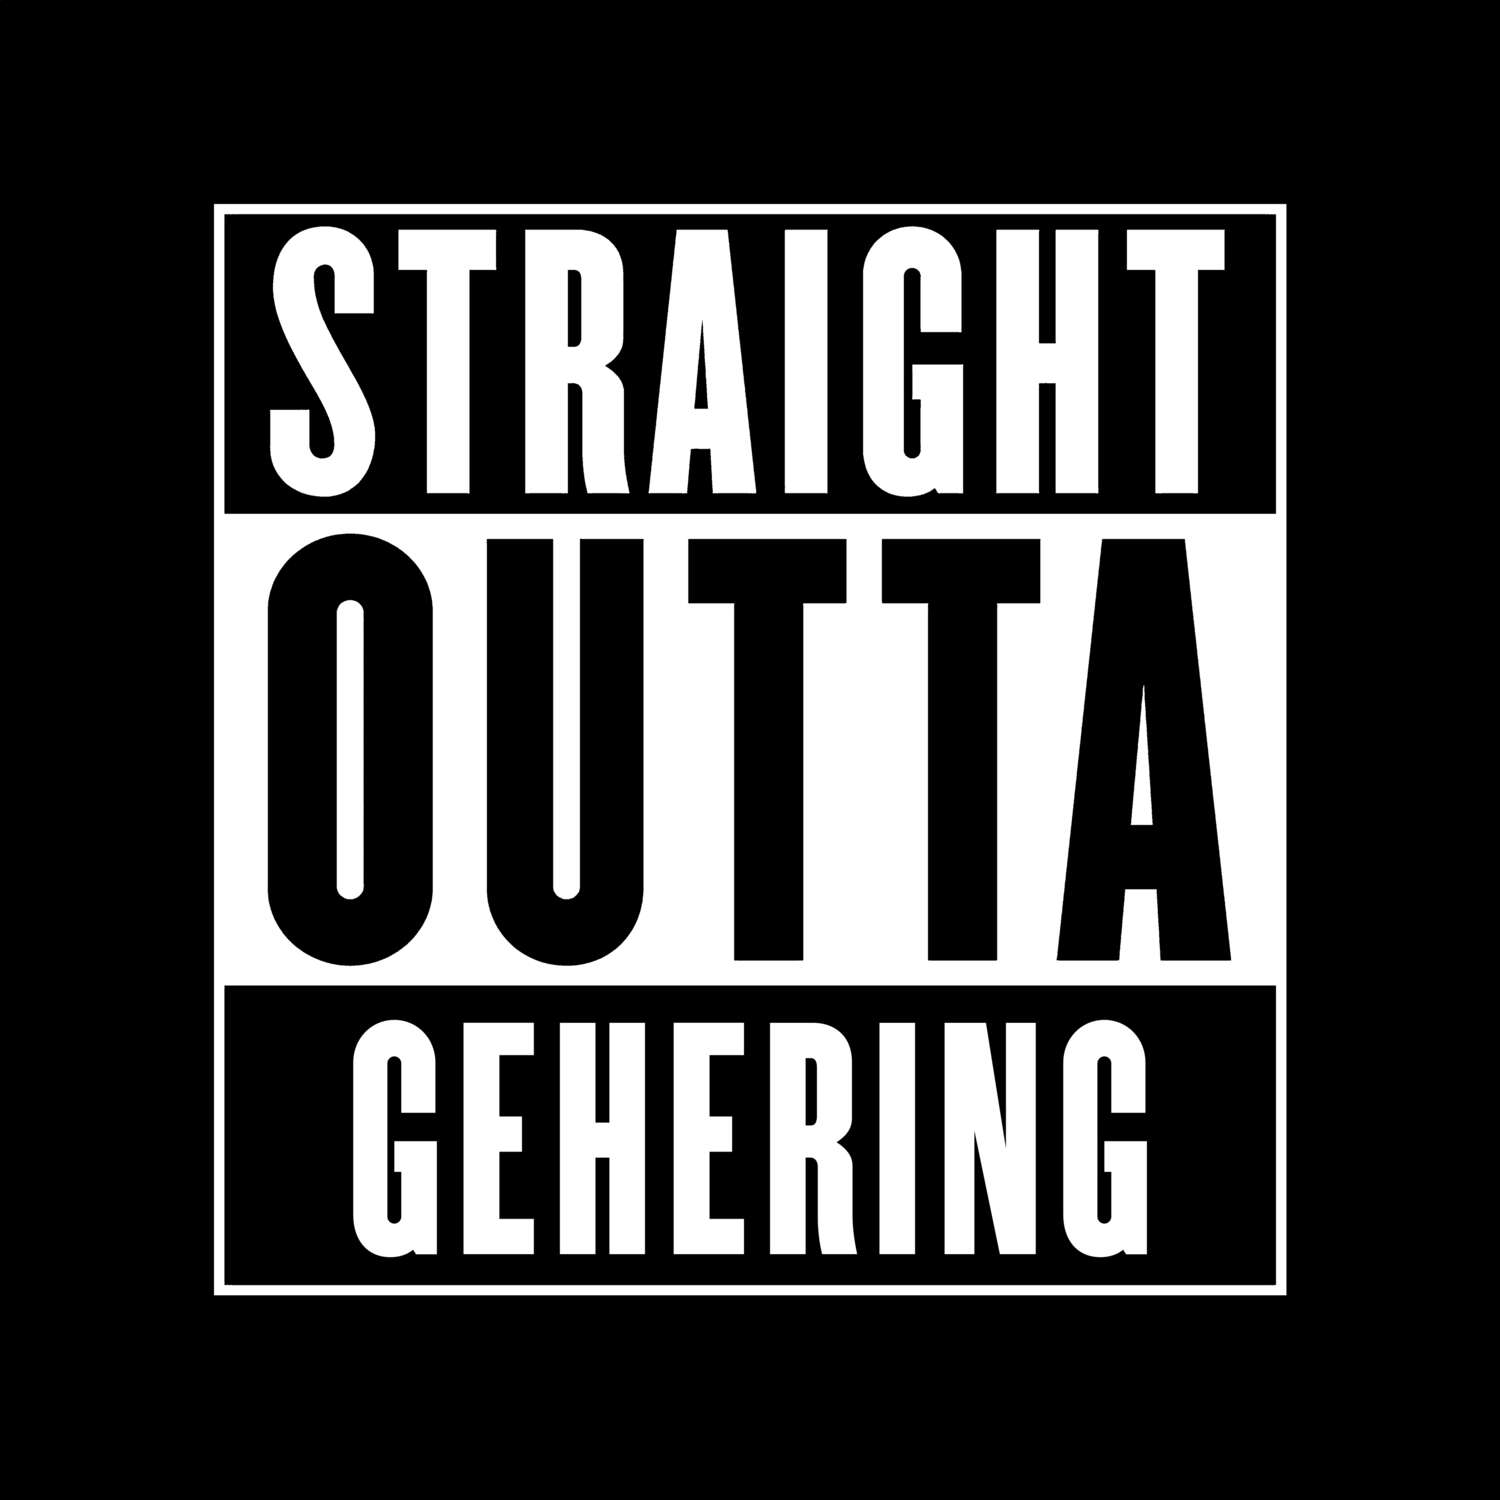 Gehering T-Shirt »Straight Outta«